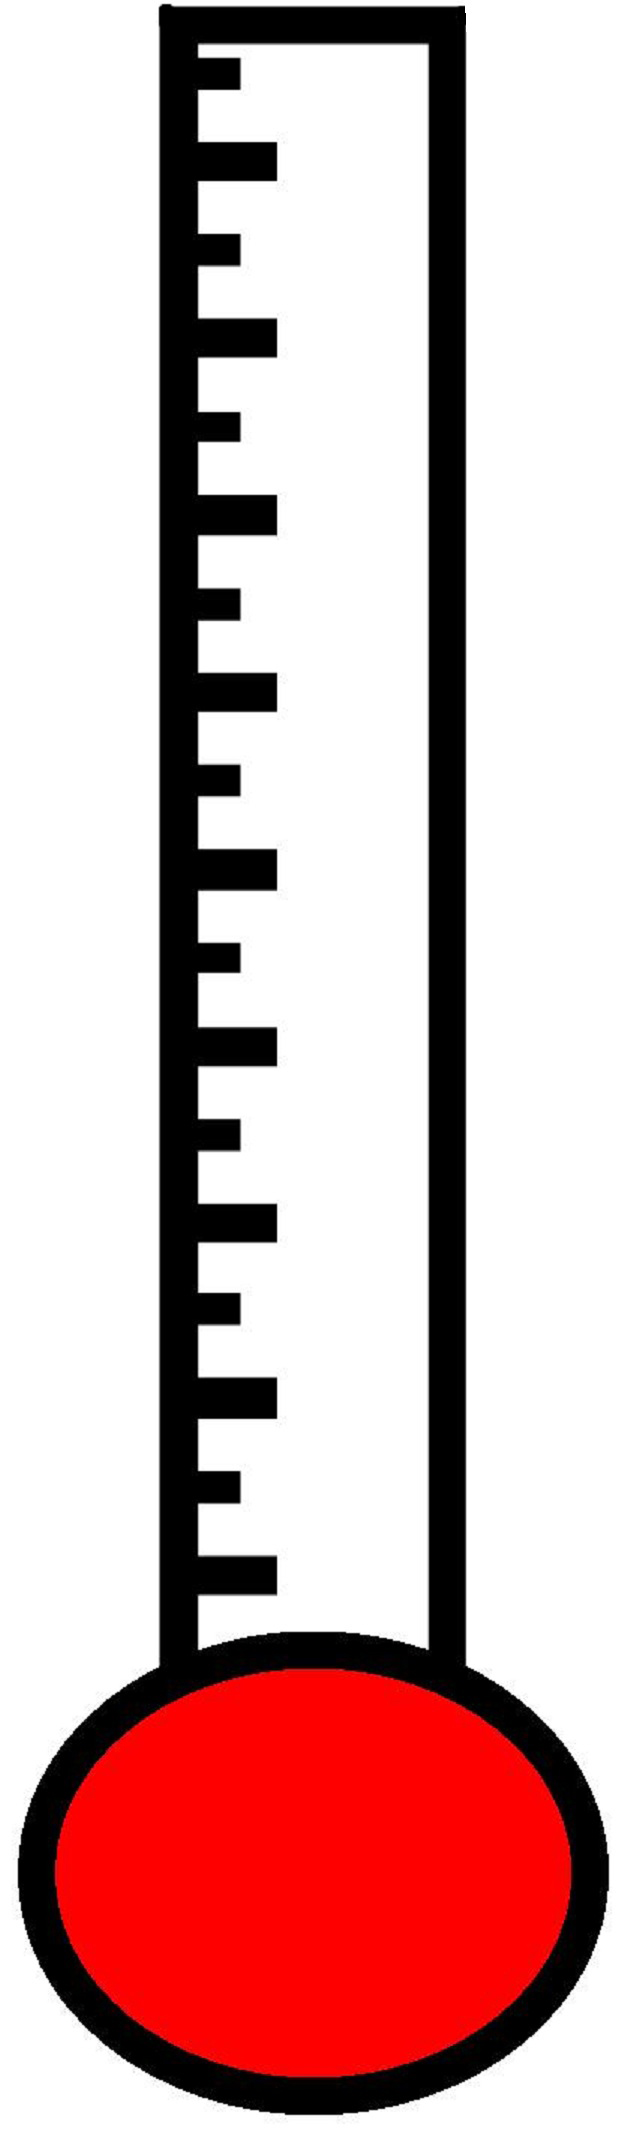 Blank Thermometer   Clipart Panda   Free Clipart Images